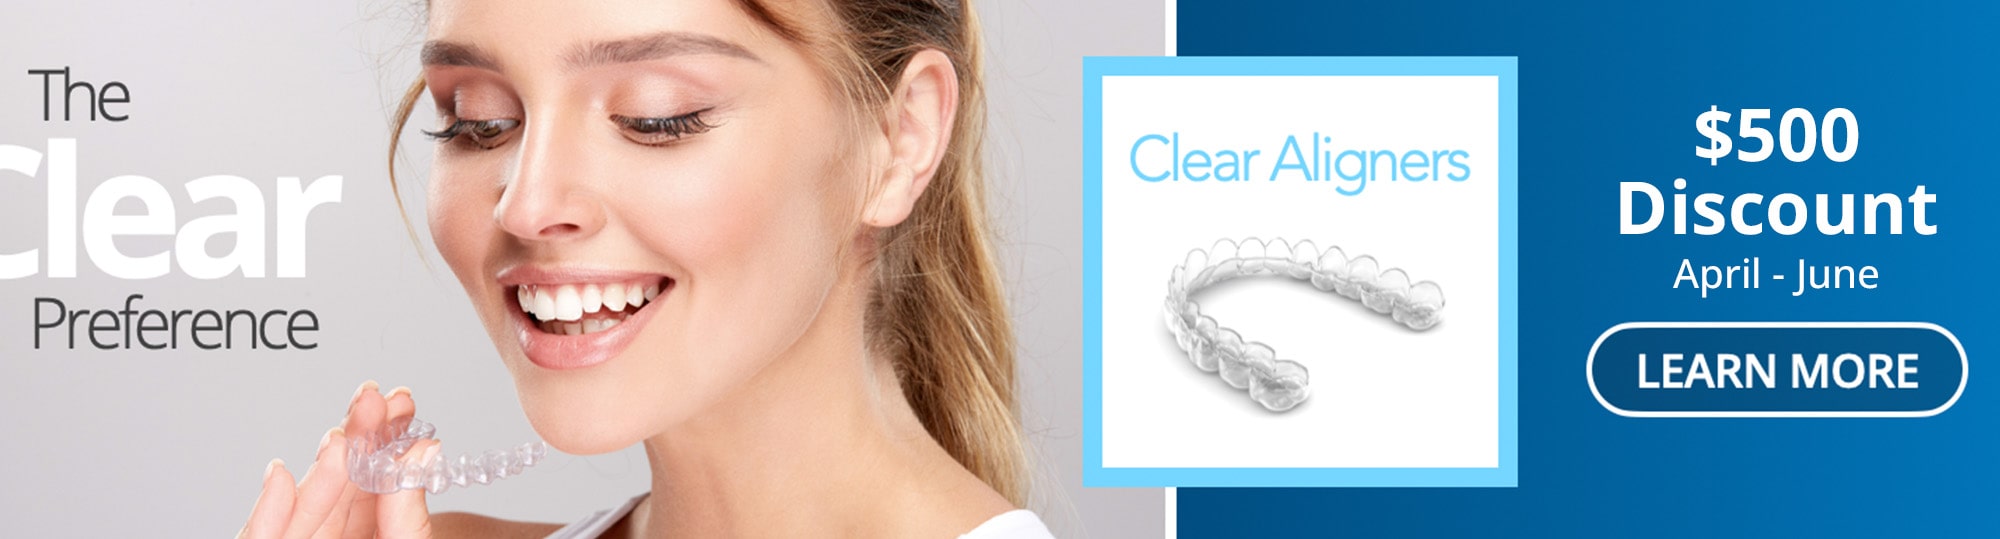 clear aligners $500 off call today